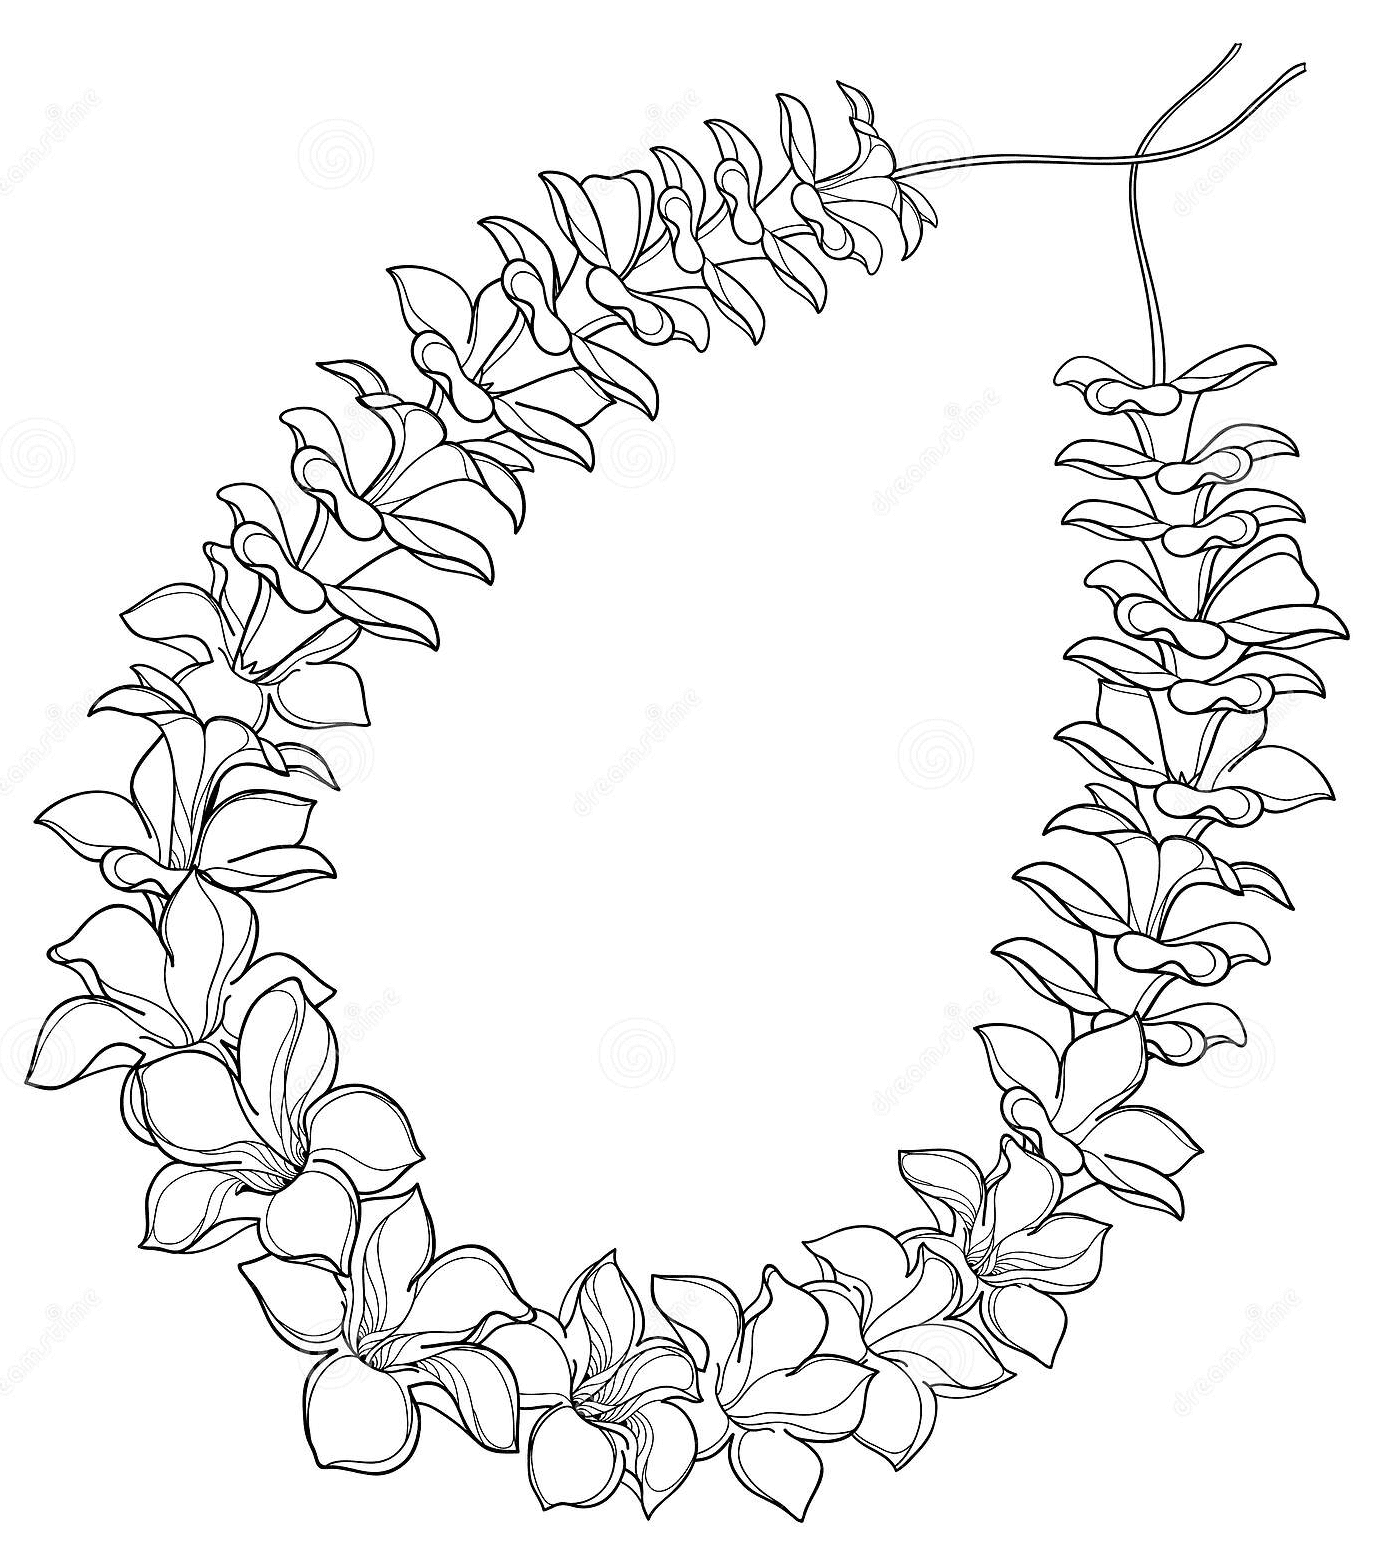 Flower Garland Coloring Page